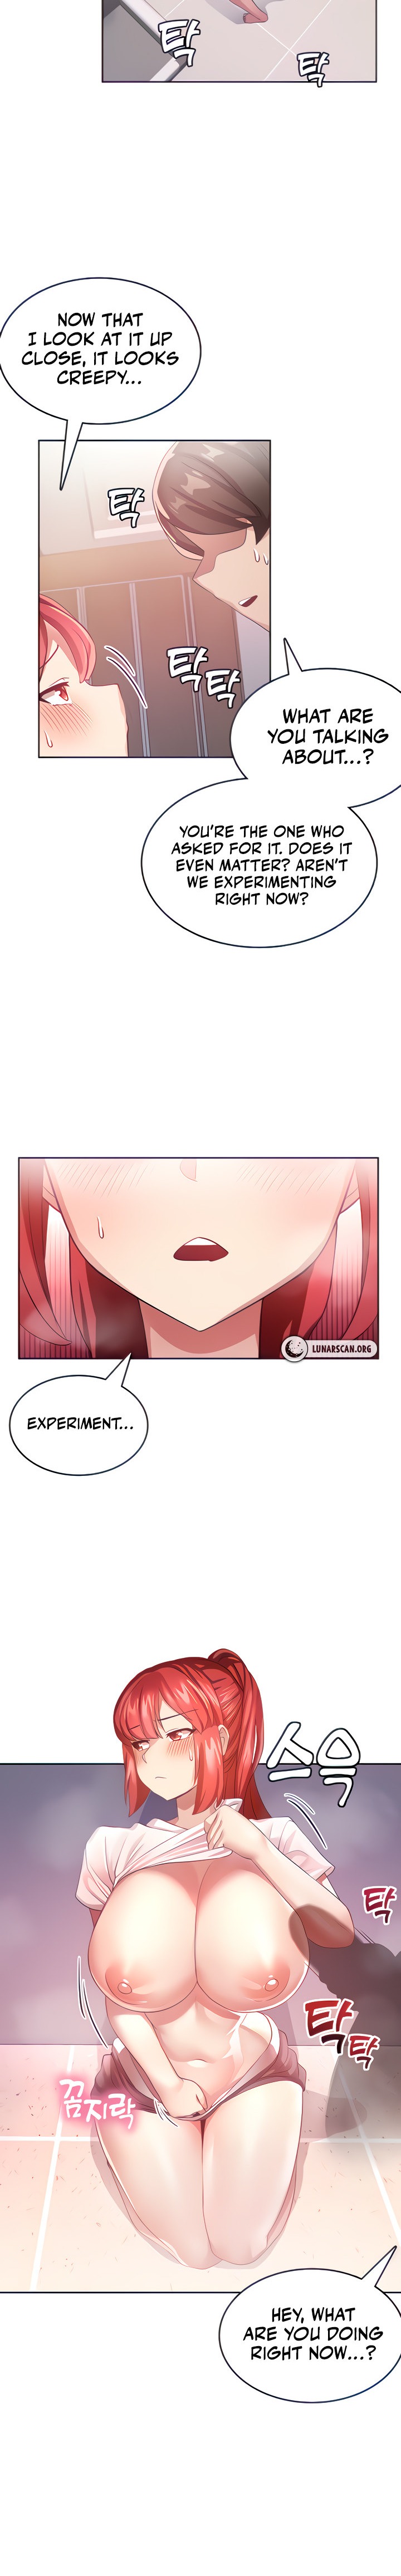 Relationship Reverse Button: Let’s Cure That Arrogant Girl - Chapter 7 Page 3